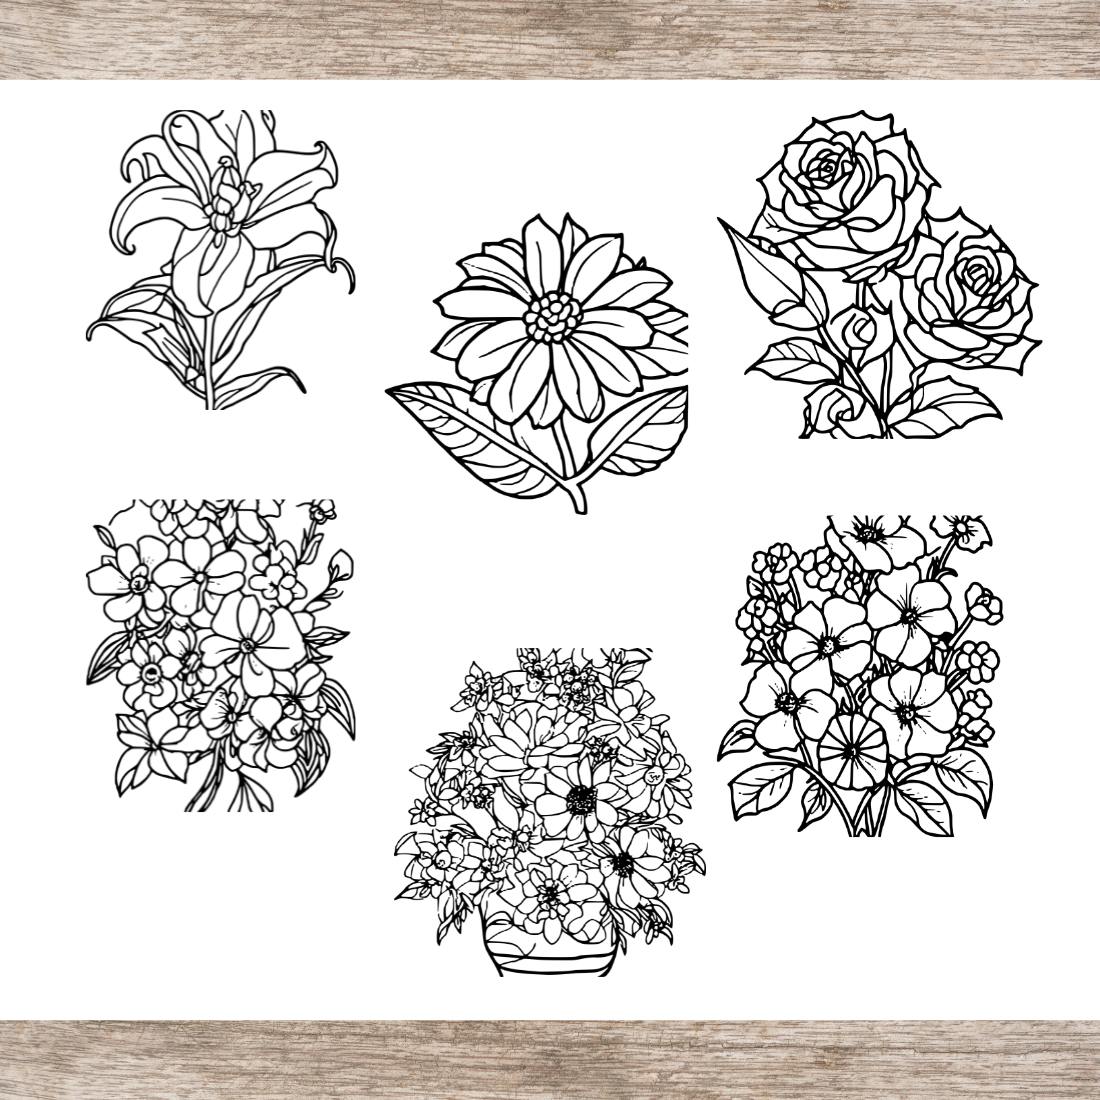 6 Floral Coloring Pages with For Adults (SVG and PNG) flower drawing sketch preview image.